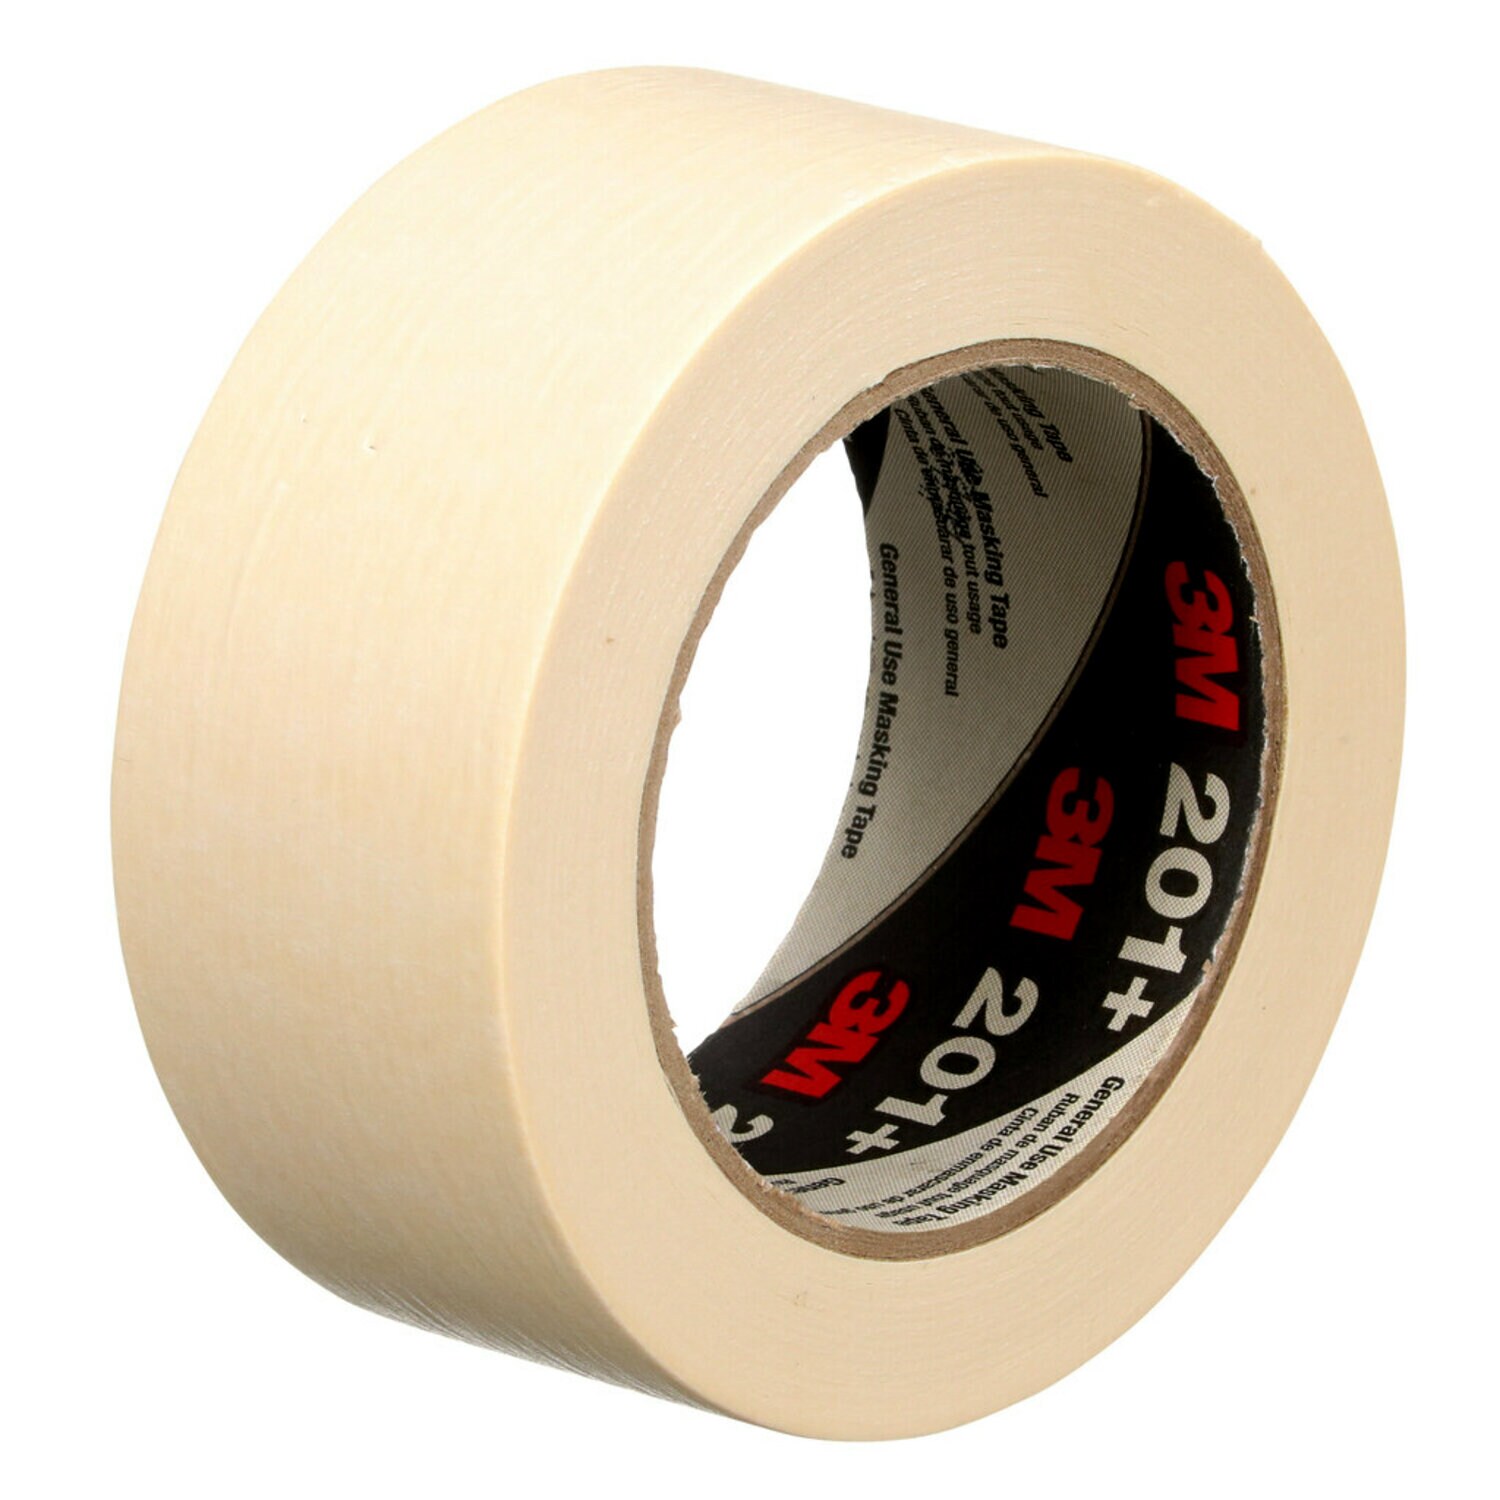 7000148418 - 3M General Use Masking Tape 201+, Tan, 48 mm x 55 m, 4.4 mil, 24
Roll/Case, Individually Wrapped Conveniently Packaged